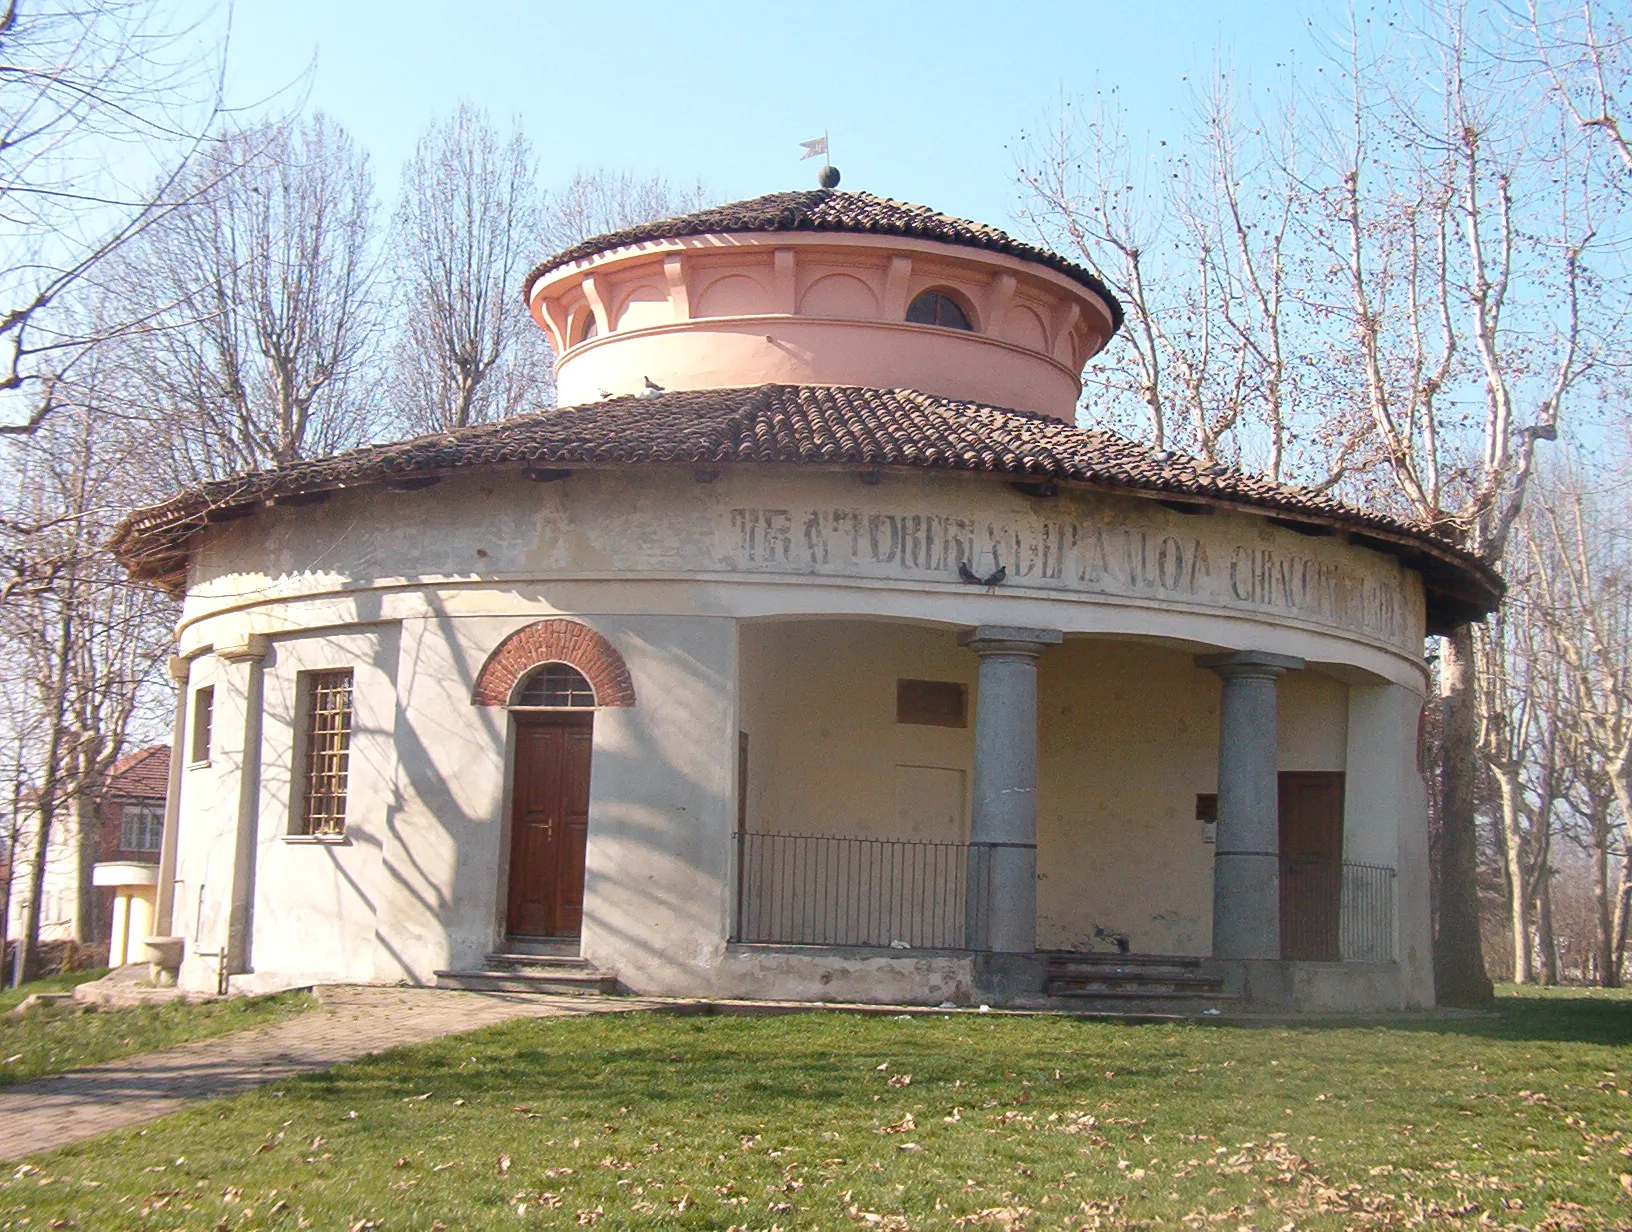 Photo showing: La Rotonda, Vigone, Italy; built in 1825 as an icehouse, currently used for exhibitions